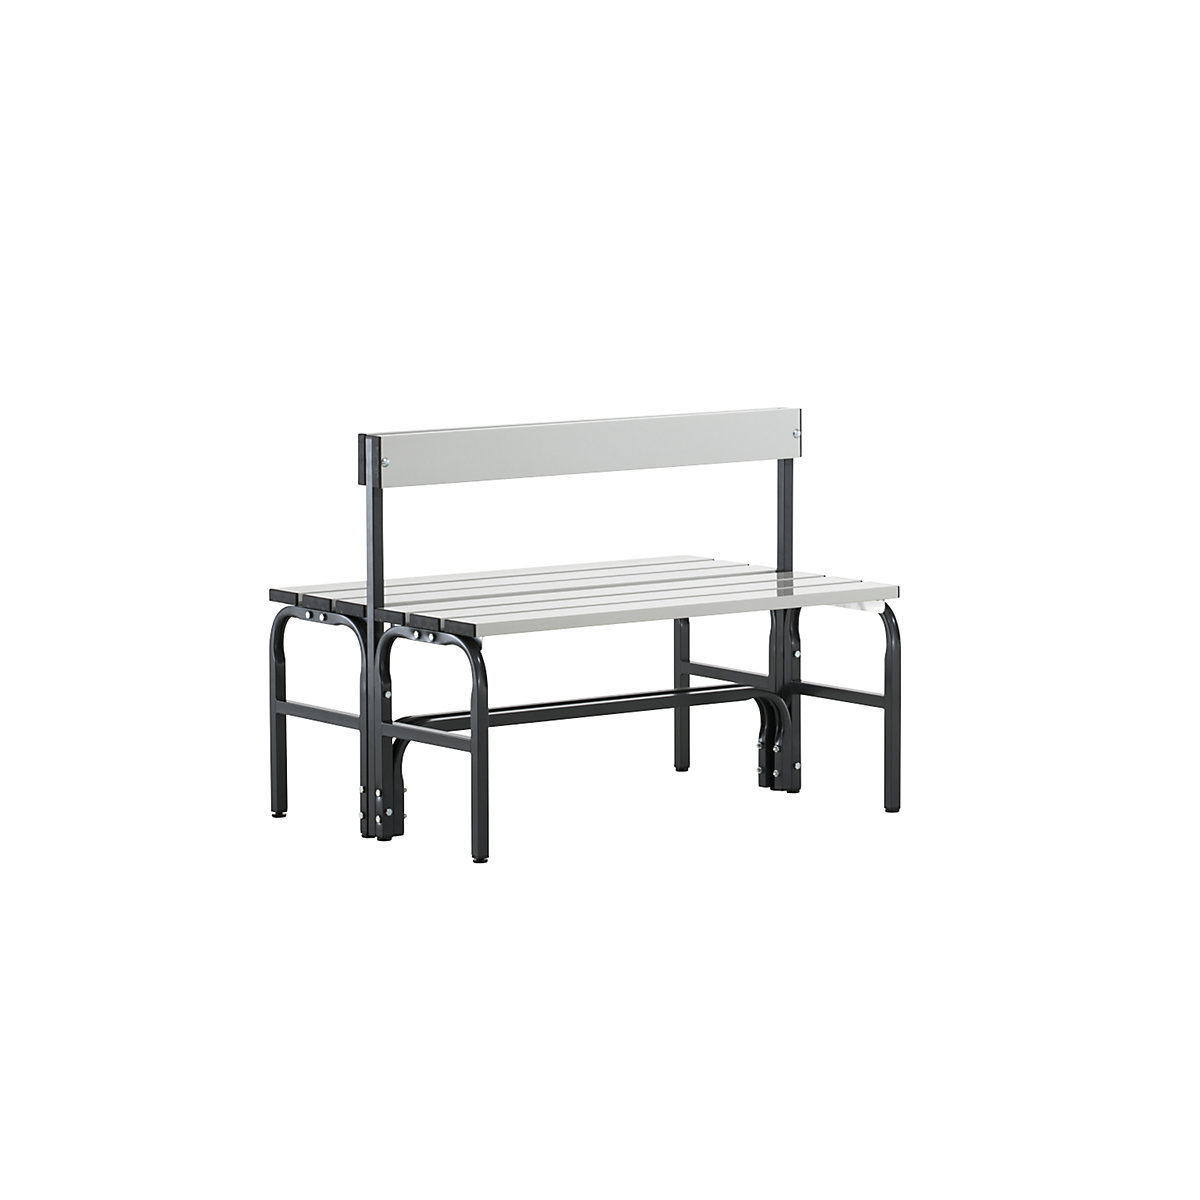 Half height cloakroom bench with back rest, double sided – Sypro